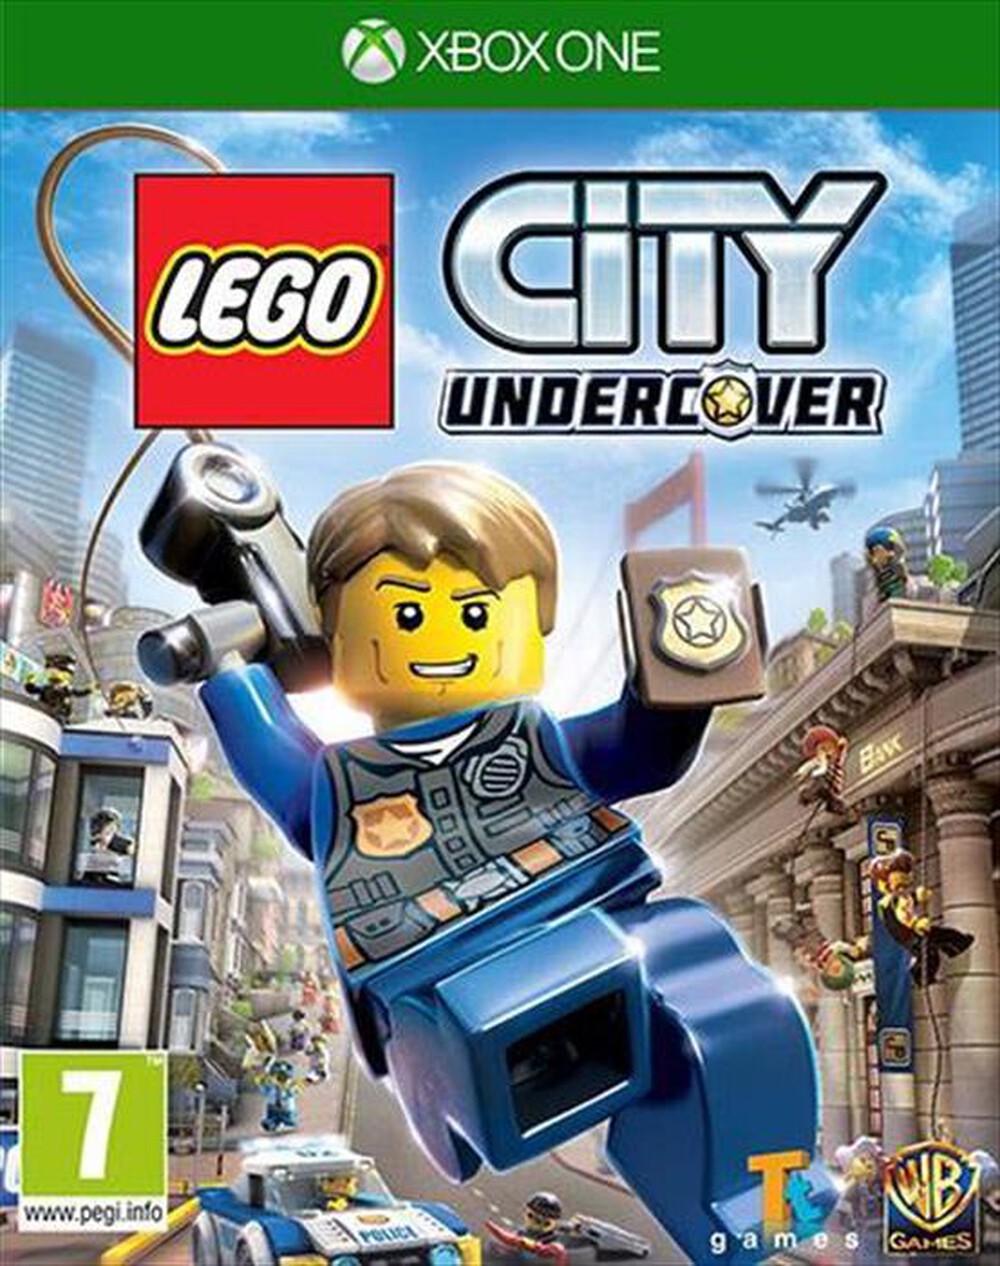 "WARNER GAMES - LEGO City Undercover XBOX ONE"